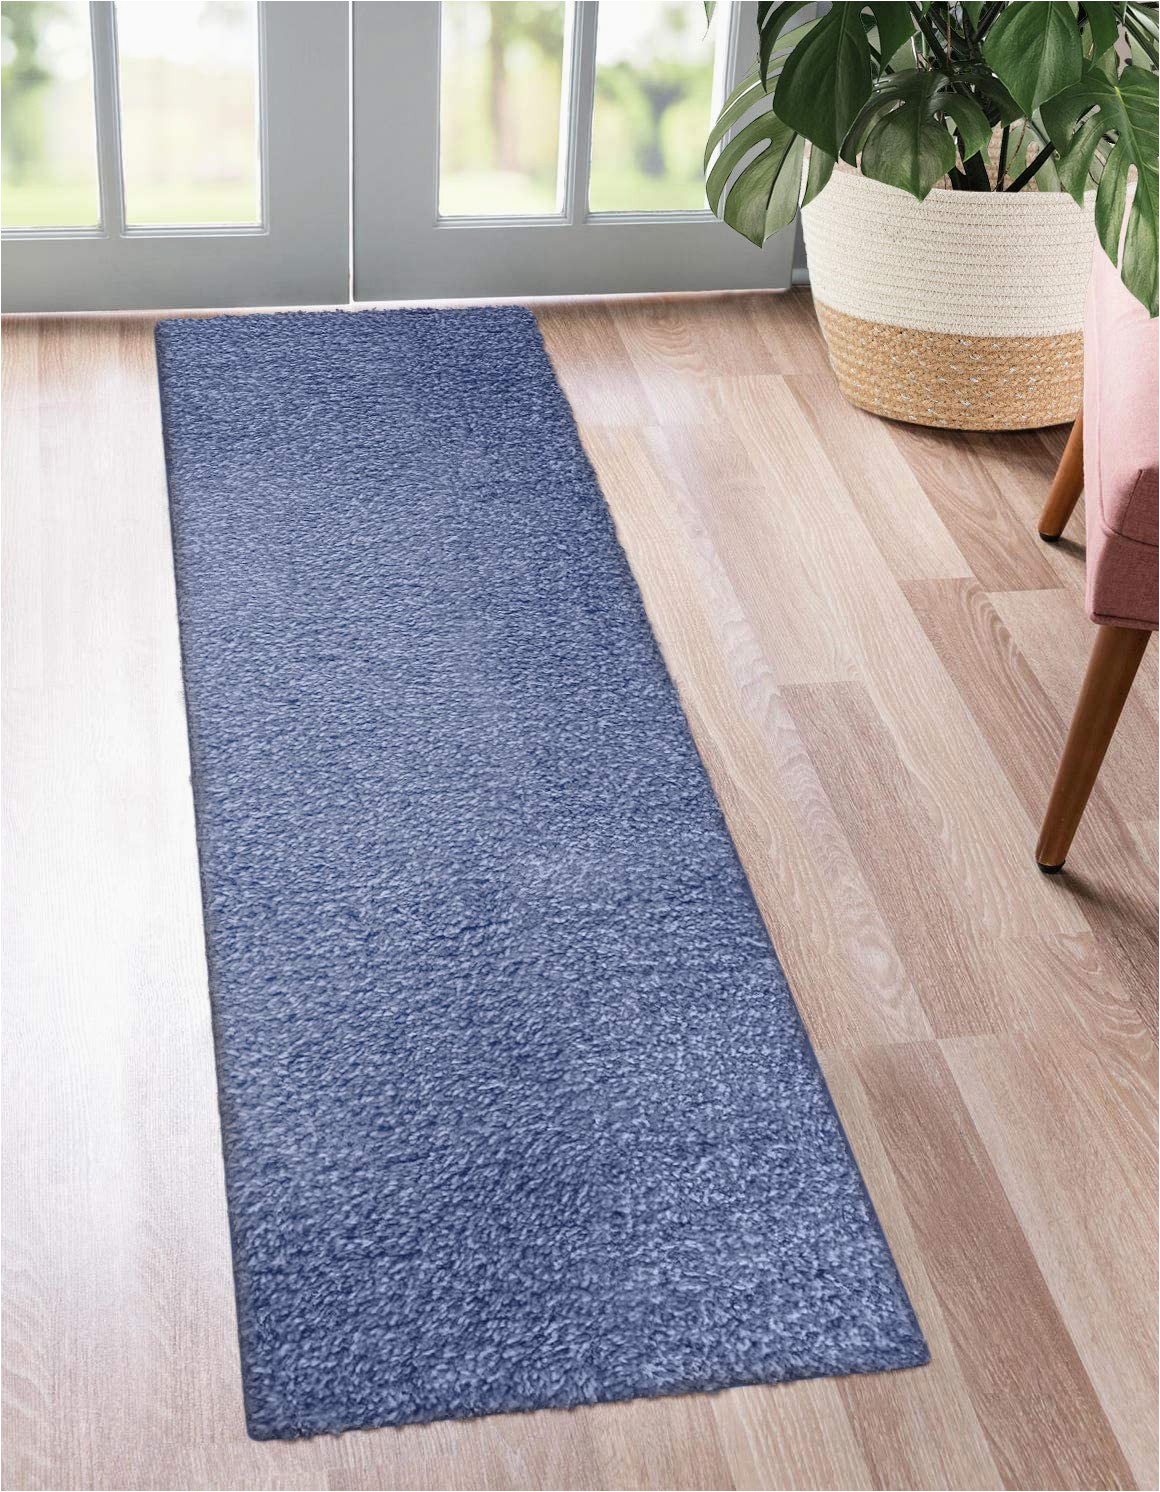 Area Rugs with Waterproof Backing Kaluns Runner Rug Hallway Runnert Super Absorbent Rug Runner Doormats for Entrance Way Non Slip Pvc Waterproof Backing Machine Washable 2 X6